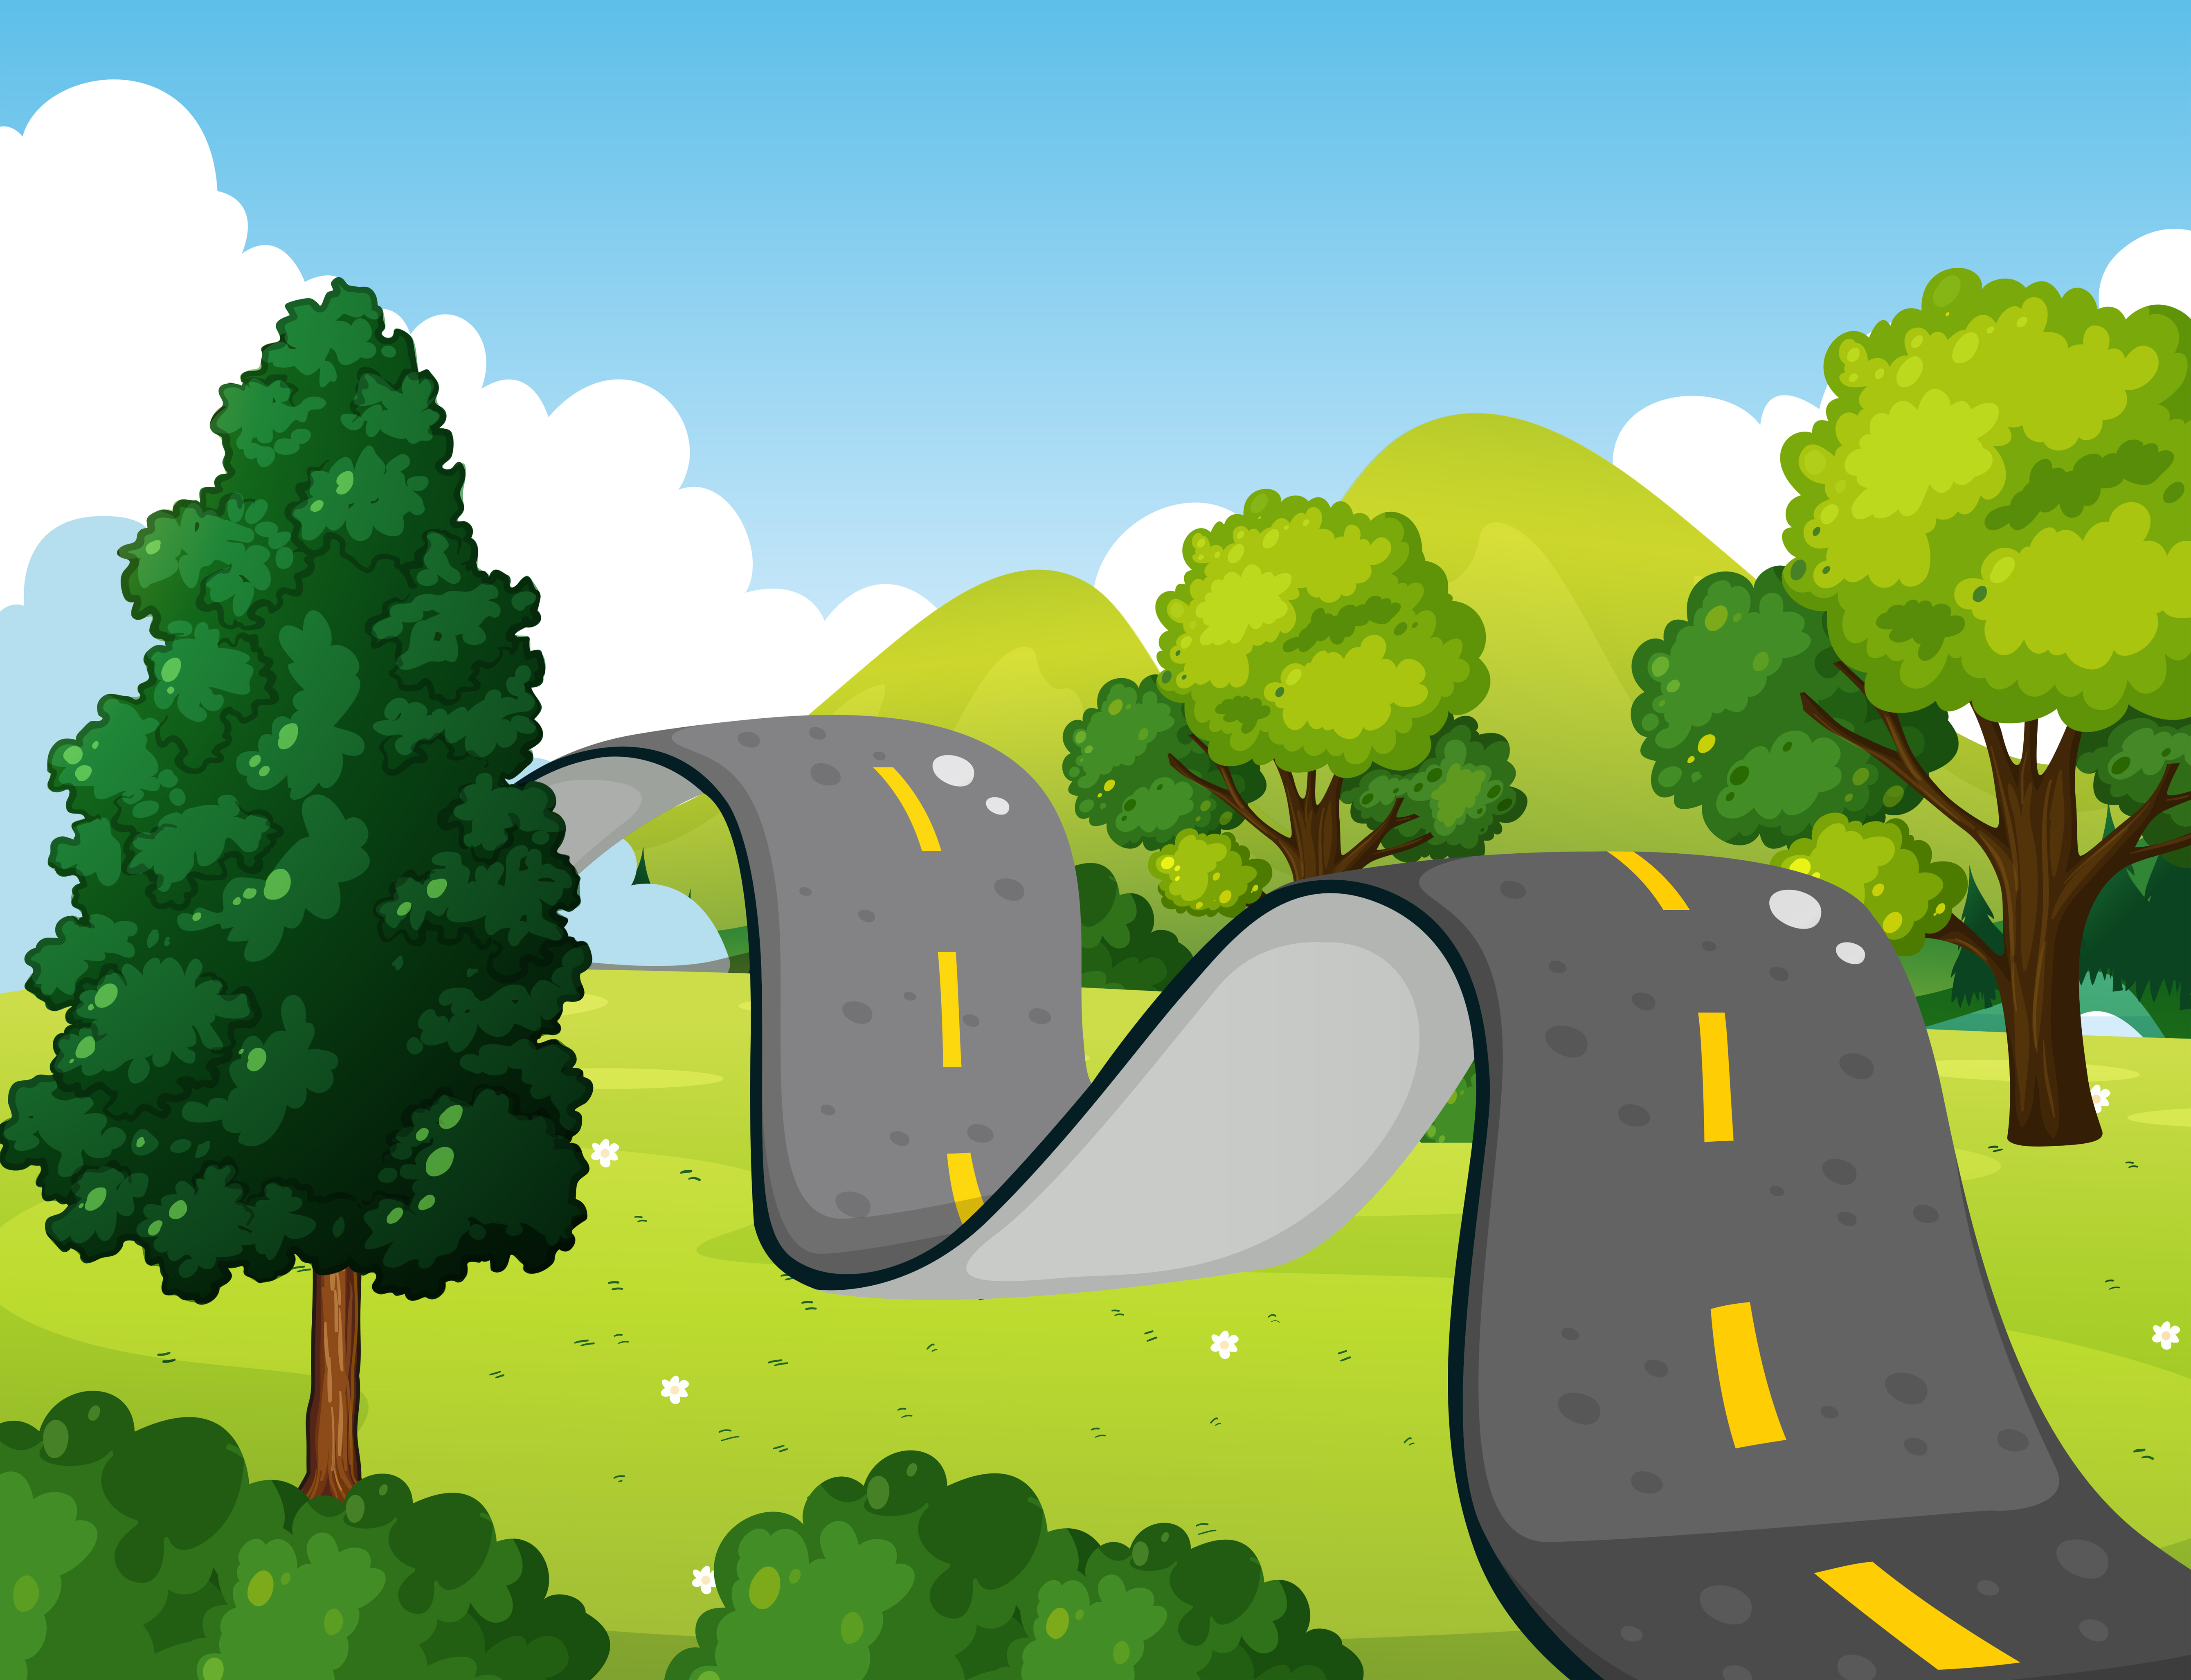 Scene With Bumpy Road In The Park Download Free Vectors Clipart Graphics Vector Art